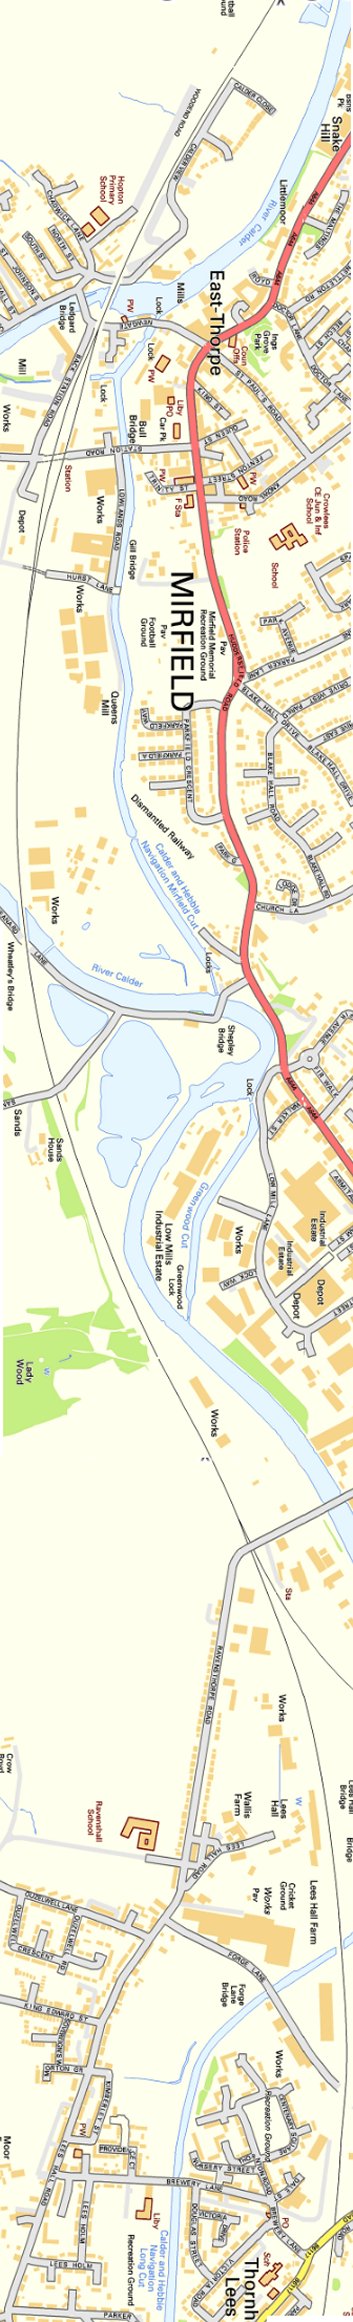 Section from Ordnance Survey OpenSource mapping 2013 showing L&YR railway line from Mirfield to Dewsbury